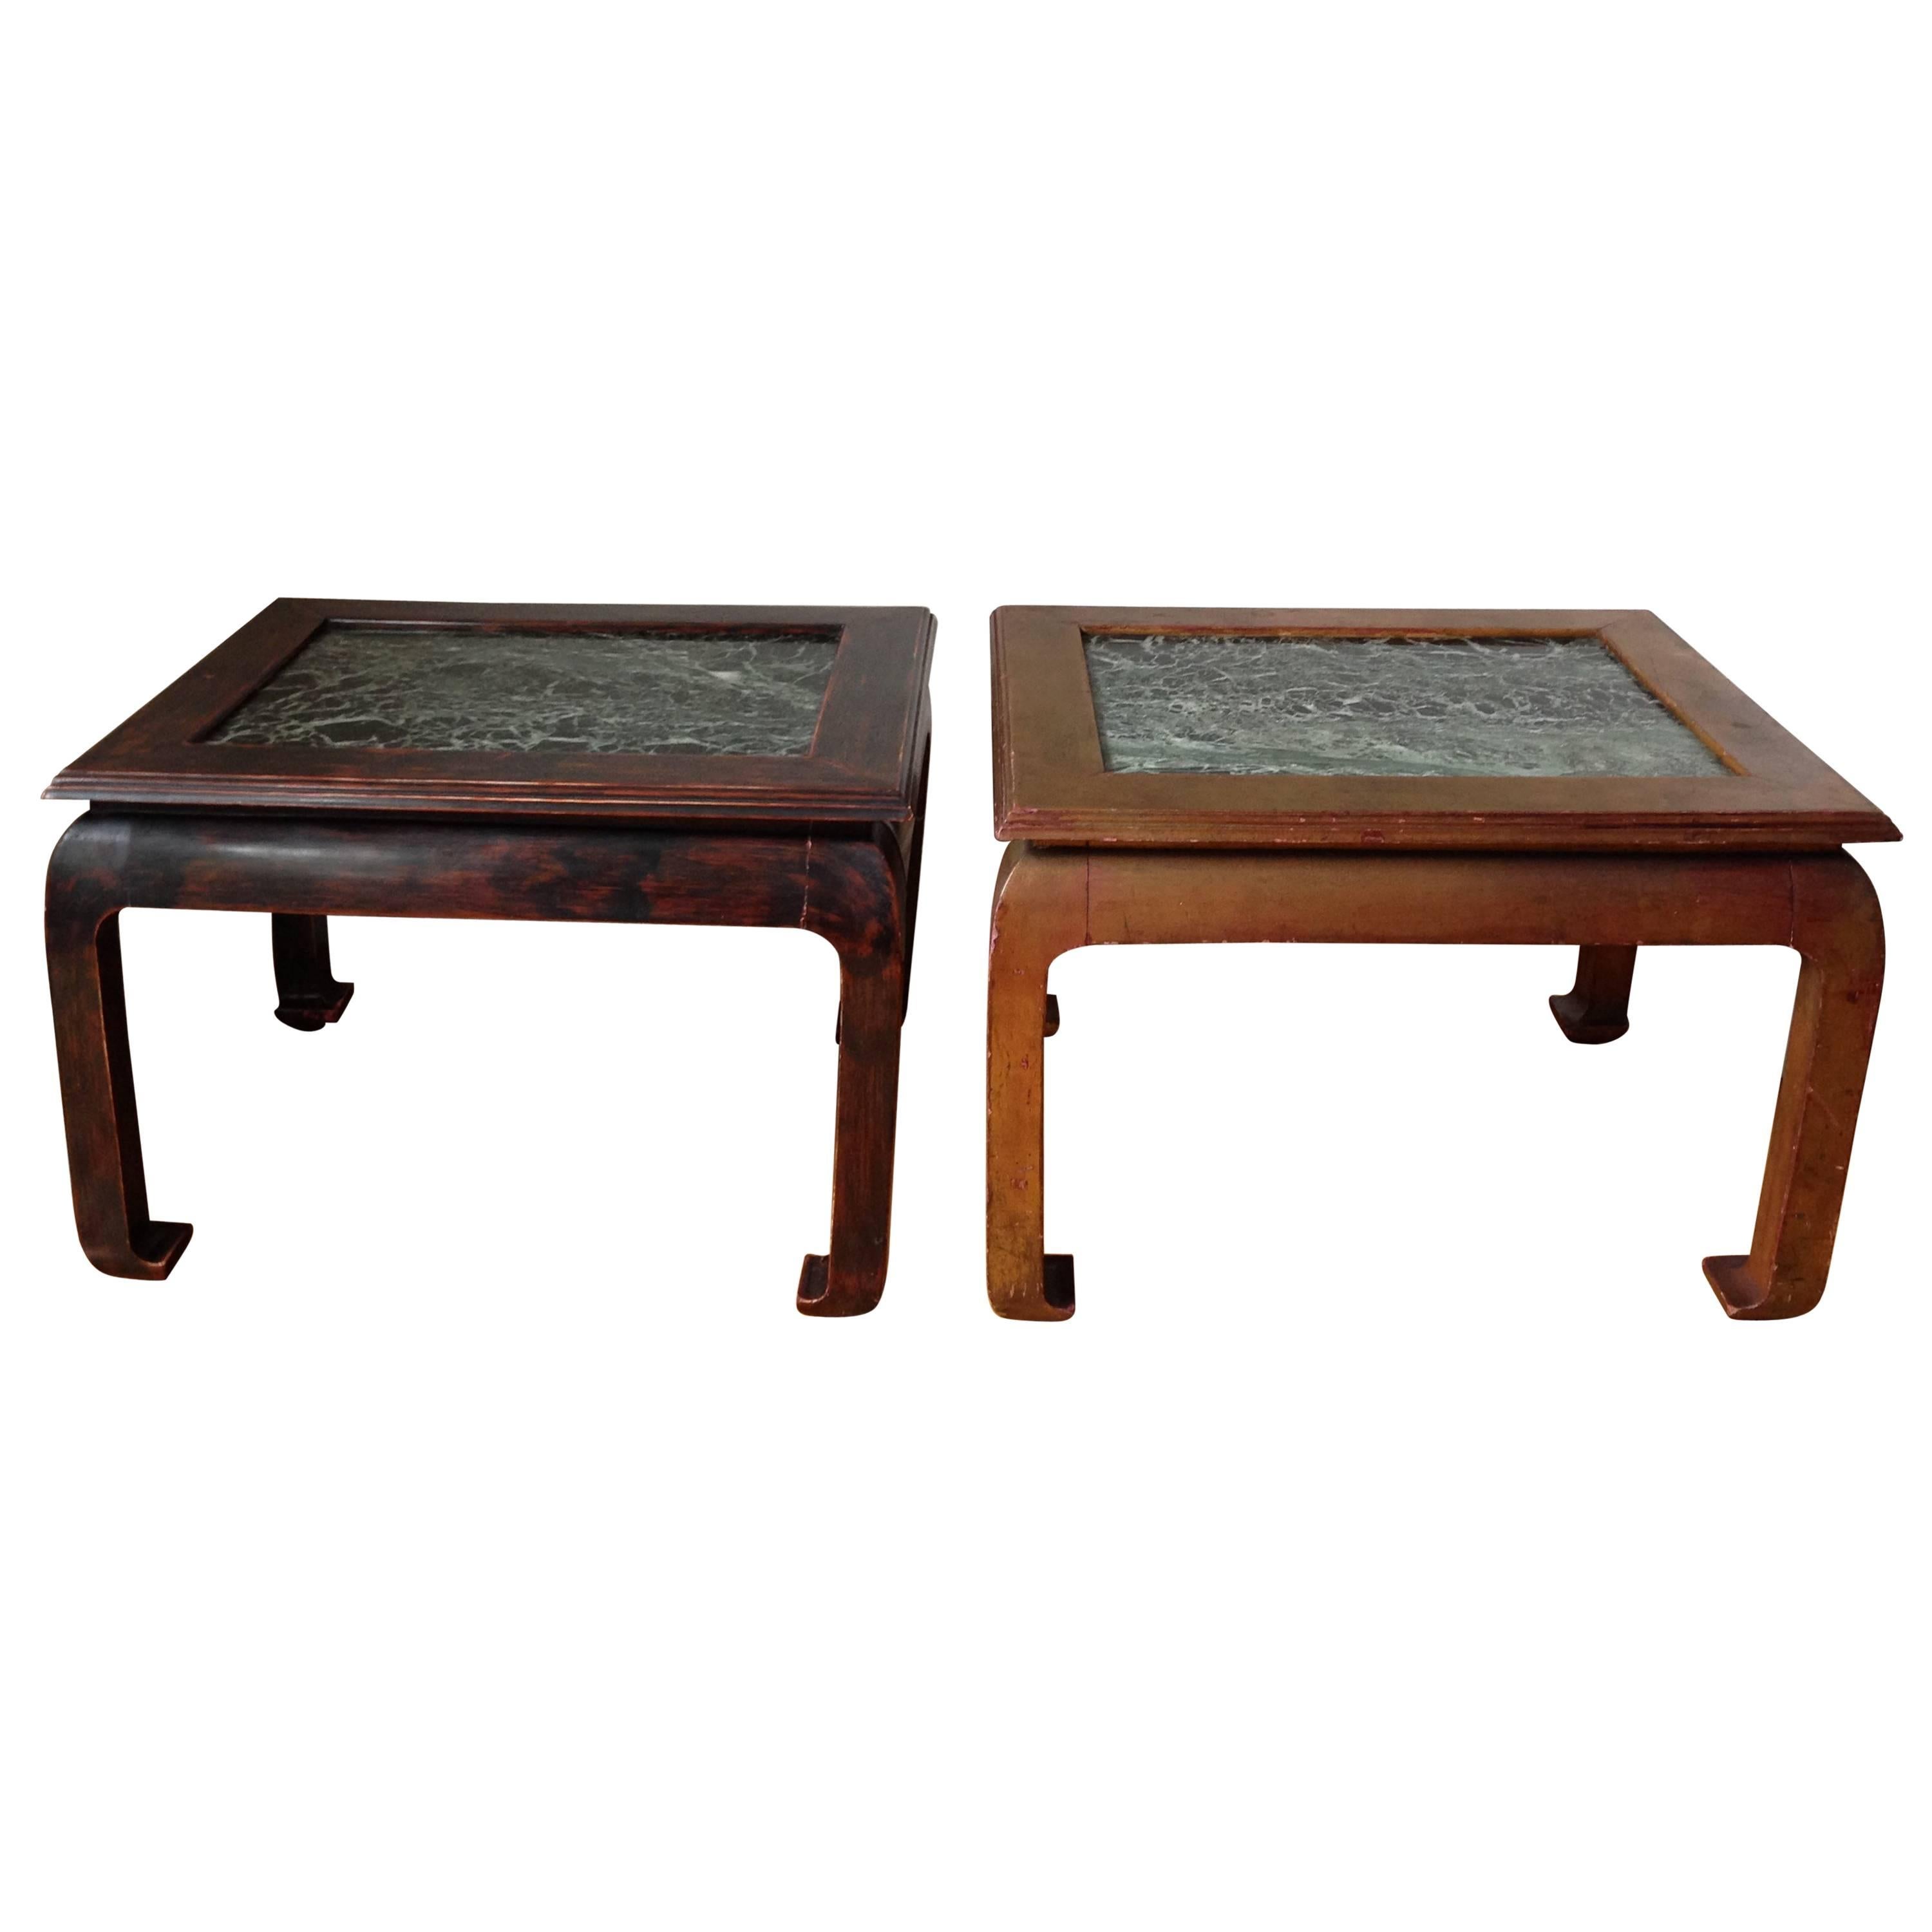 Pair of Laquered Wood and Marble Side Tables Bouts de Canape, French, circa 1940 For Sale